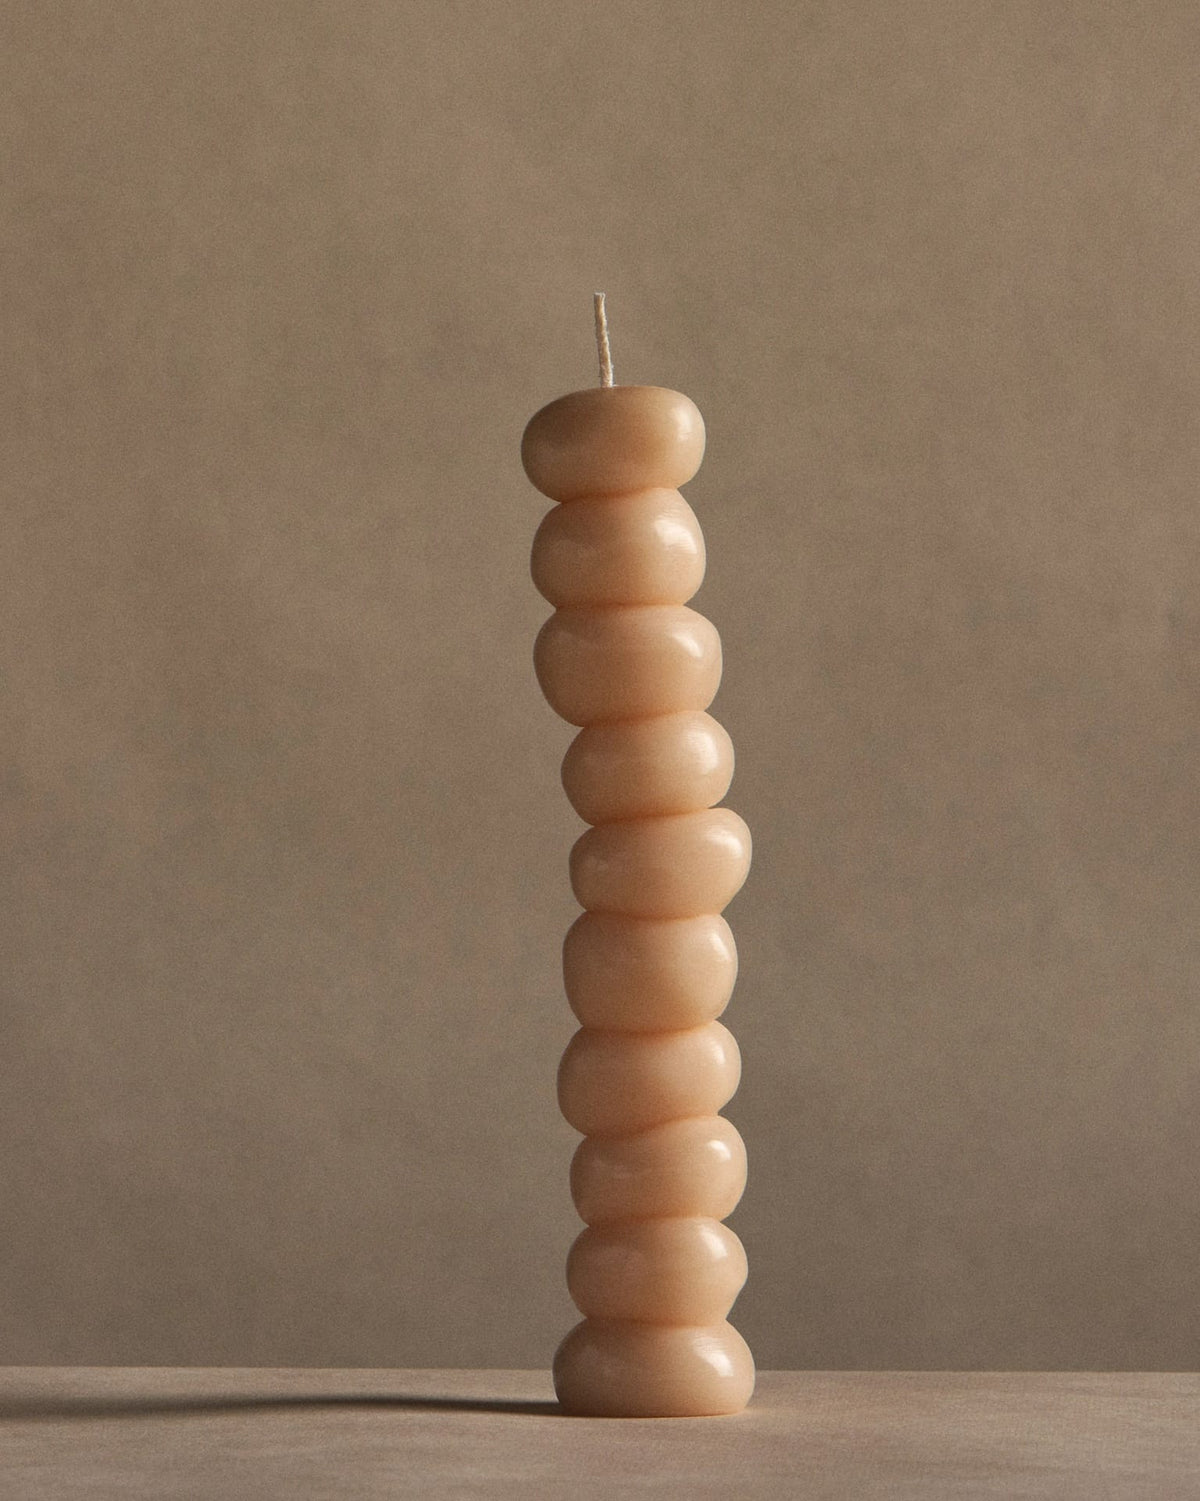 A stack of ann vincent Grape Candles on a table with a beige background.